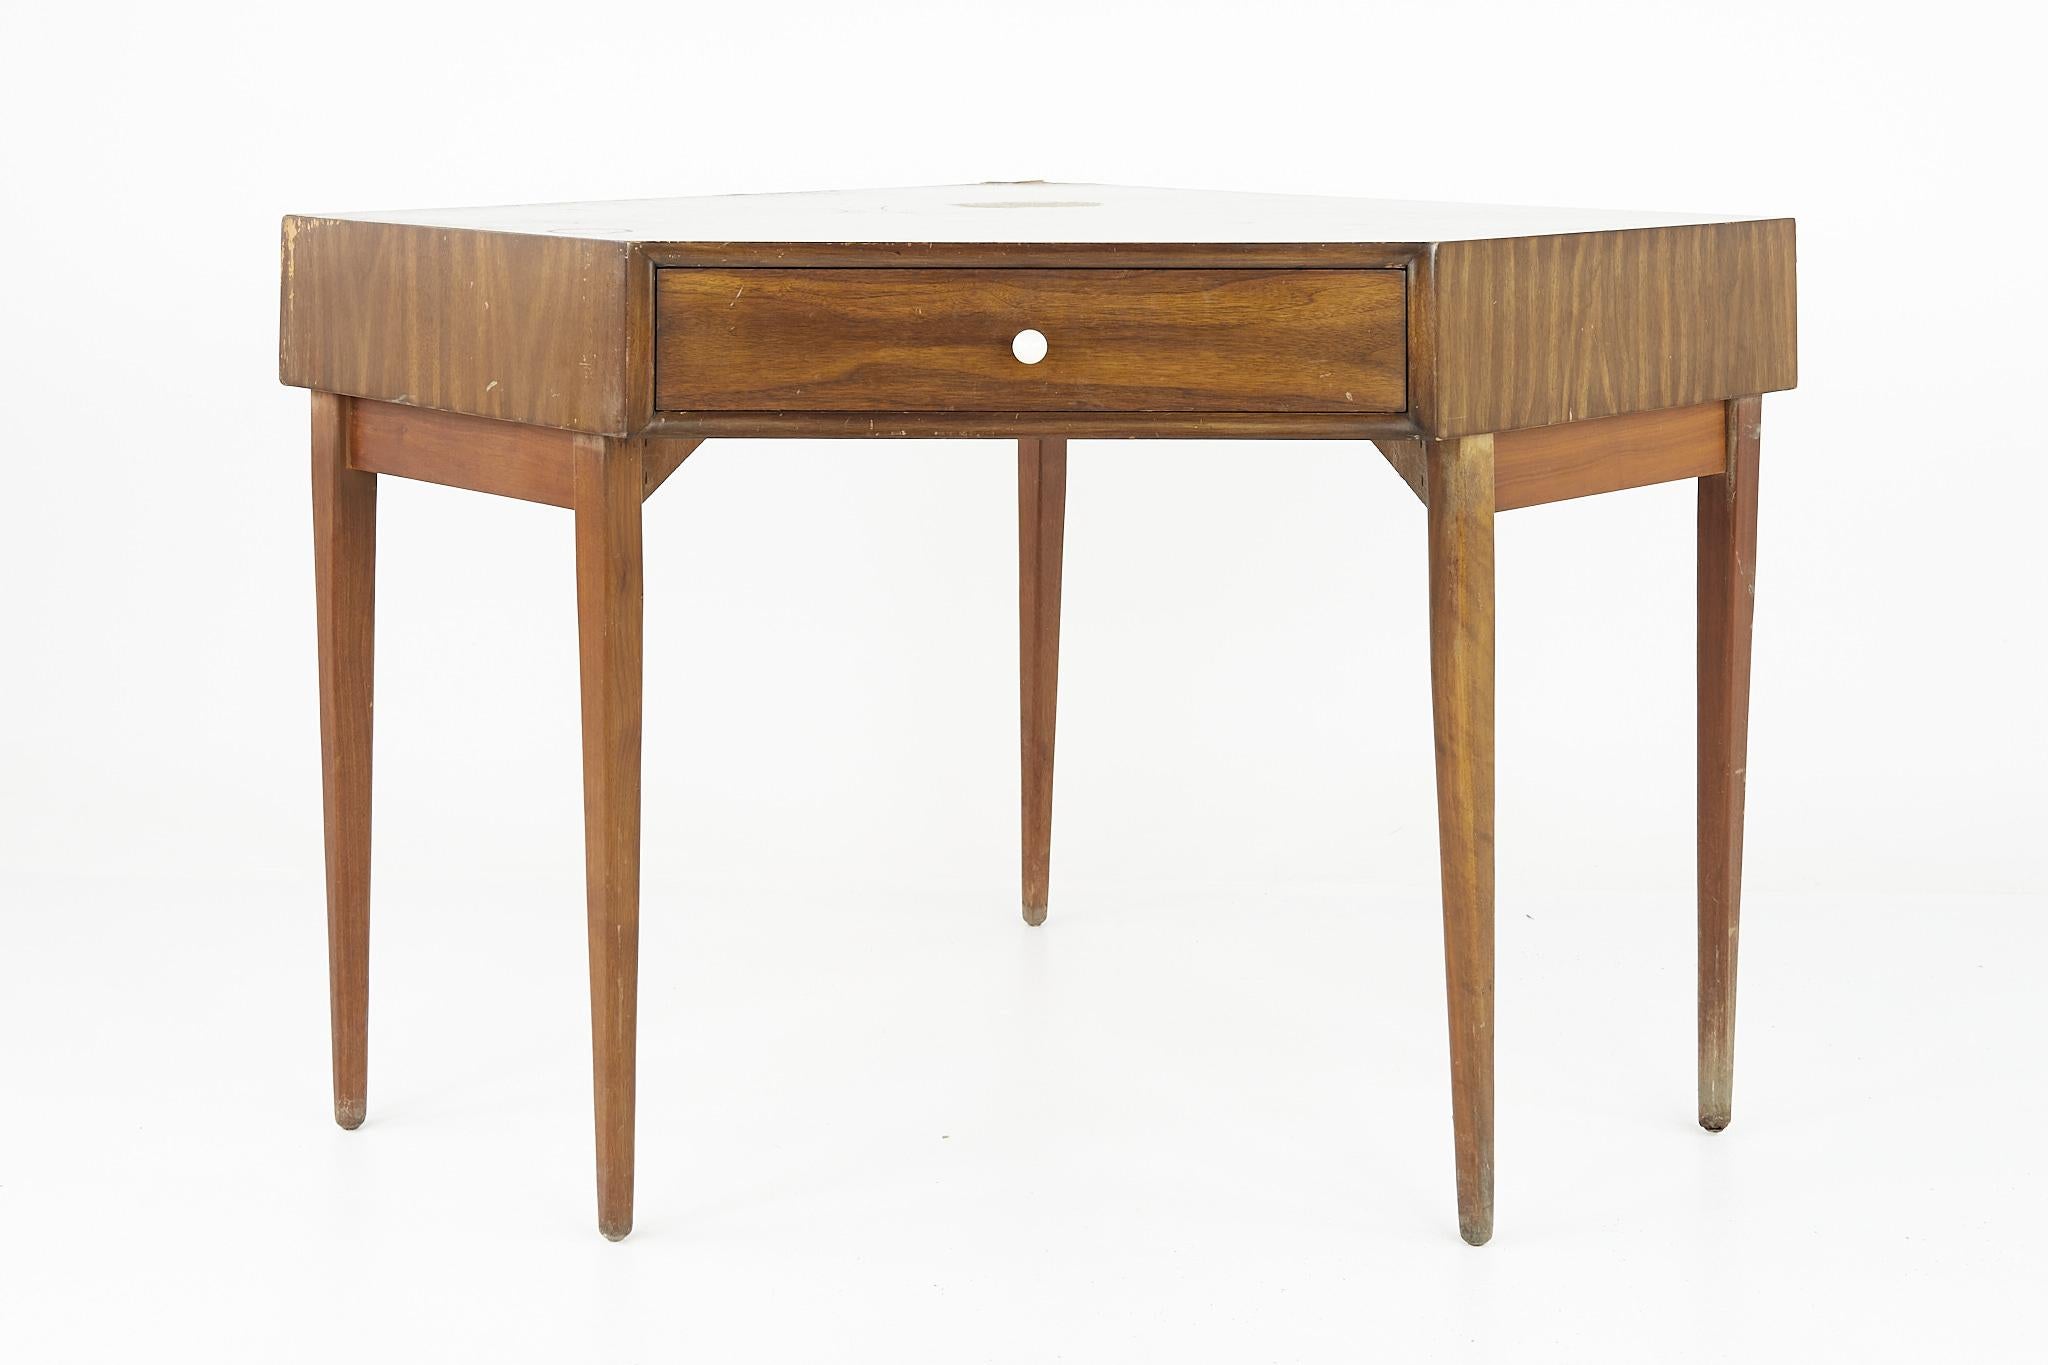 Kipp Stewart for Drexel Declaration walnut corner desk

This desk measures: 52.5 wide x 40.25 deep x 31.5 inches high, with a chair clearance of 22.5 inches

?All pieces of furniture can be had in what we call restored vintage condition. That